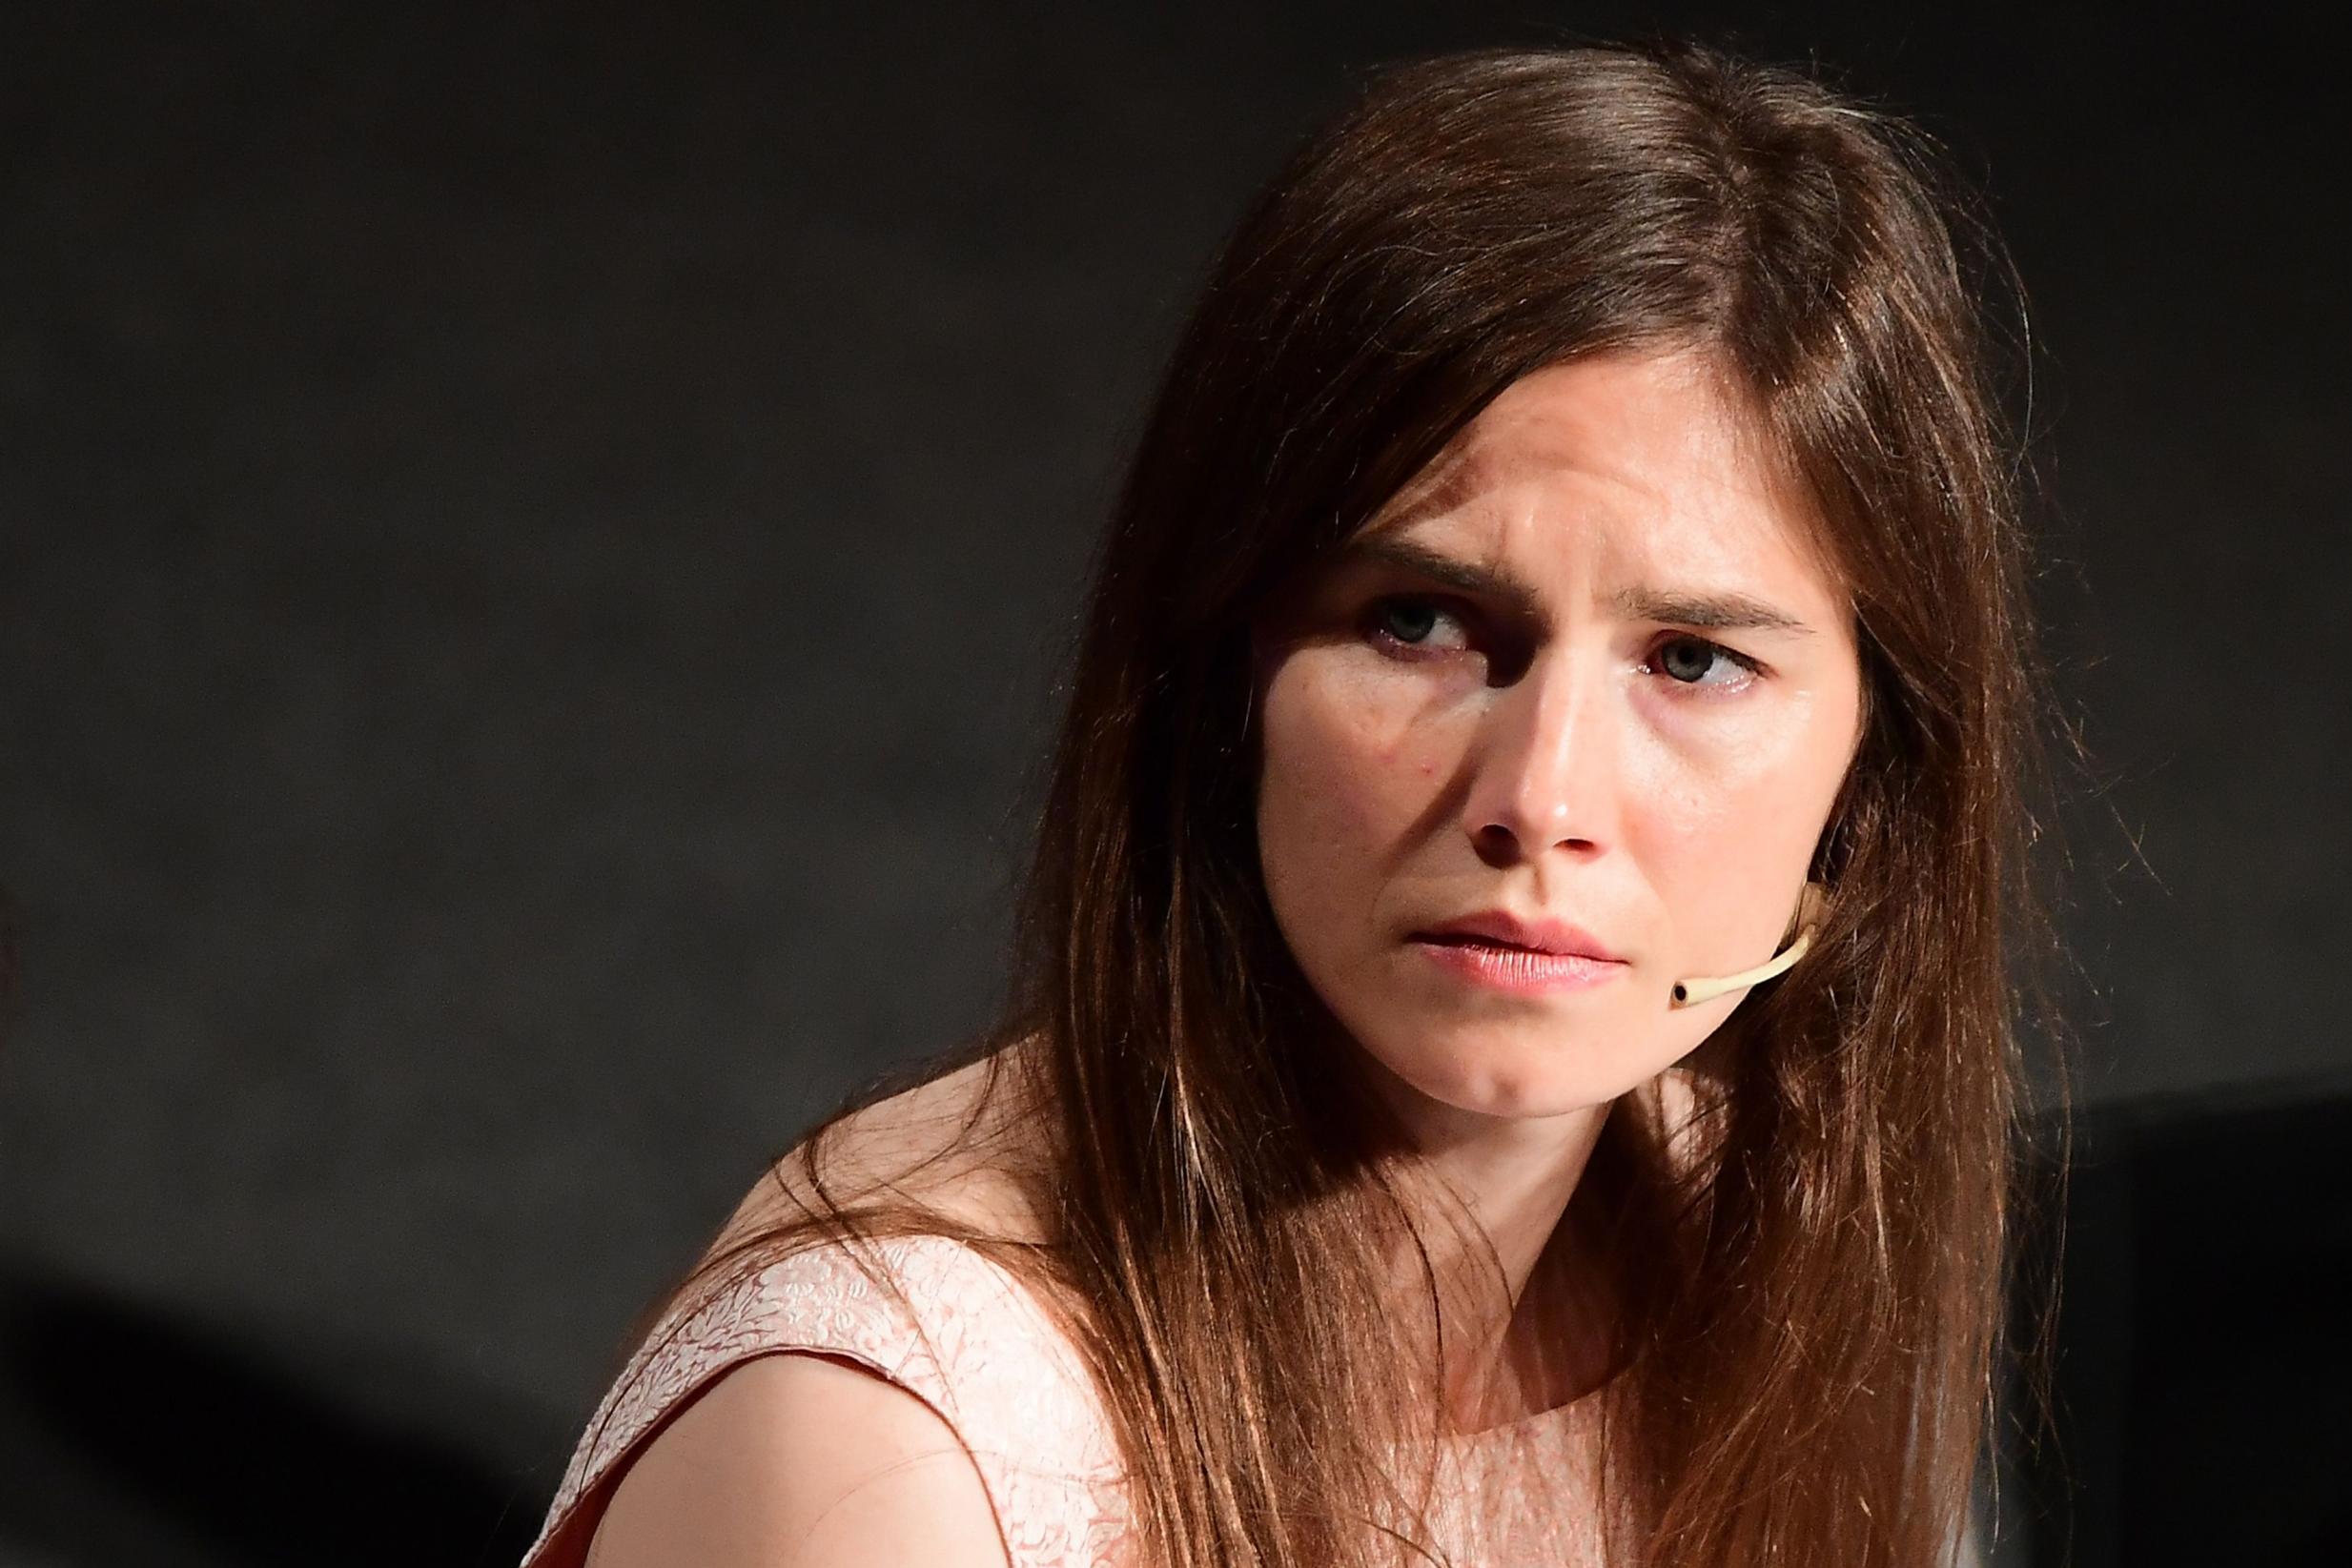 Amanda Knox attends a panel on criminal justice in Italy, on 15 June 2019.